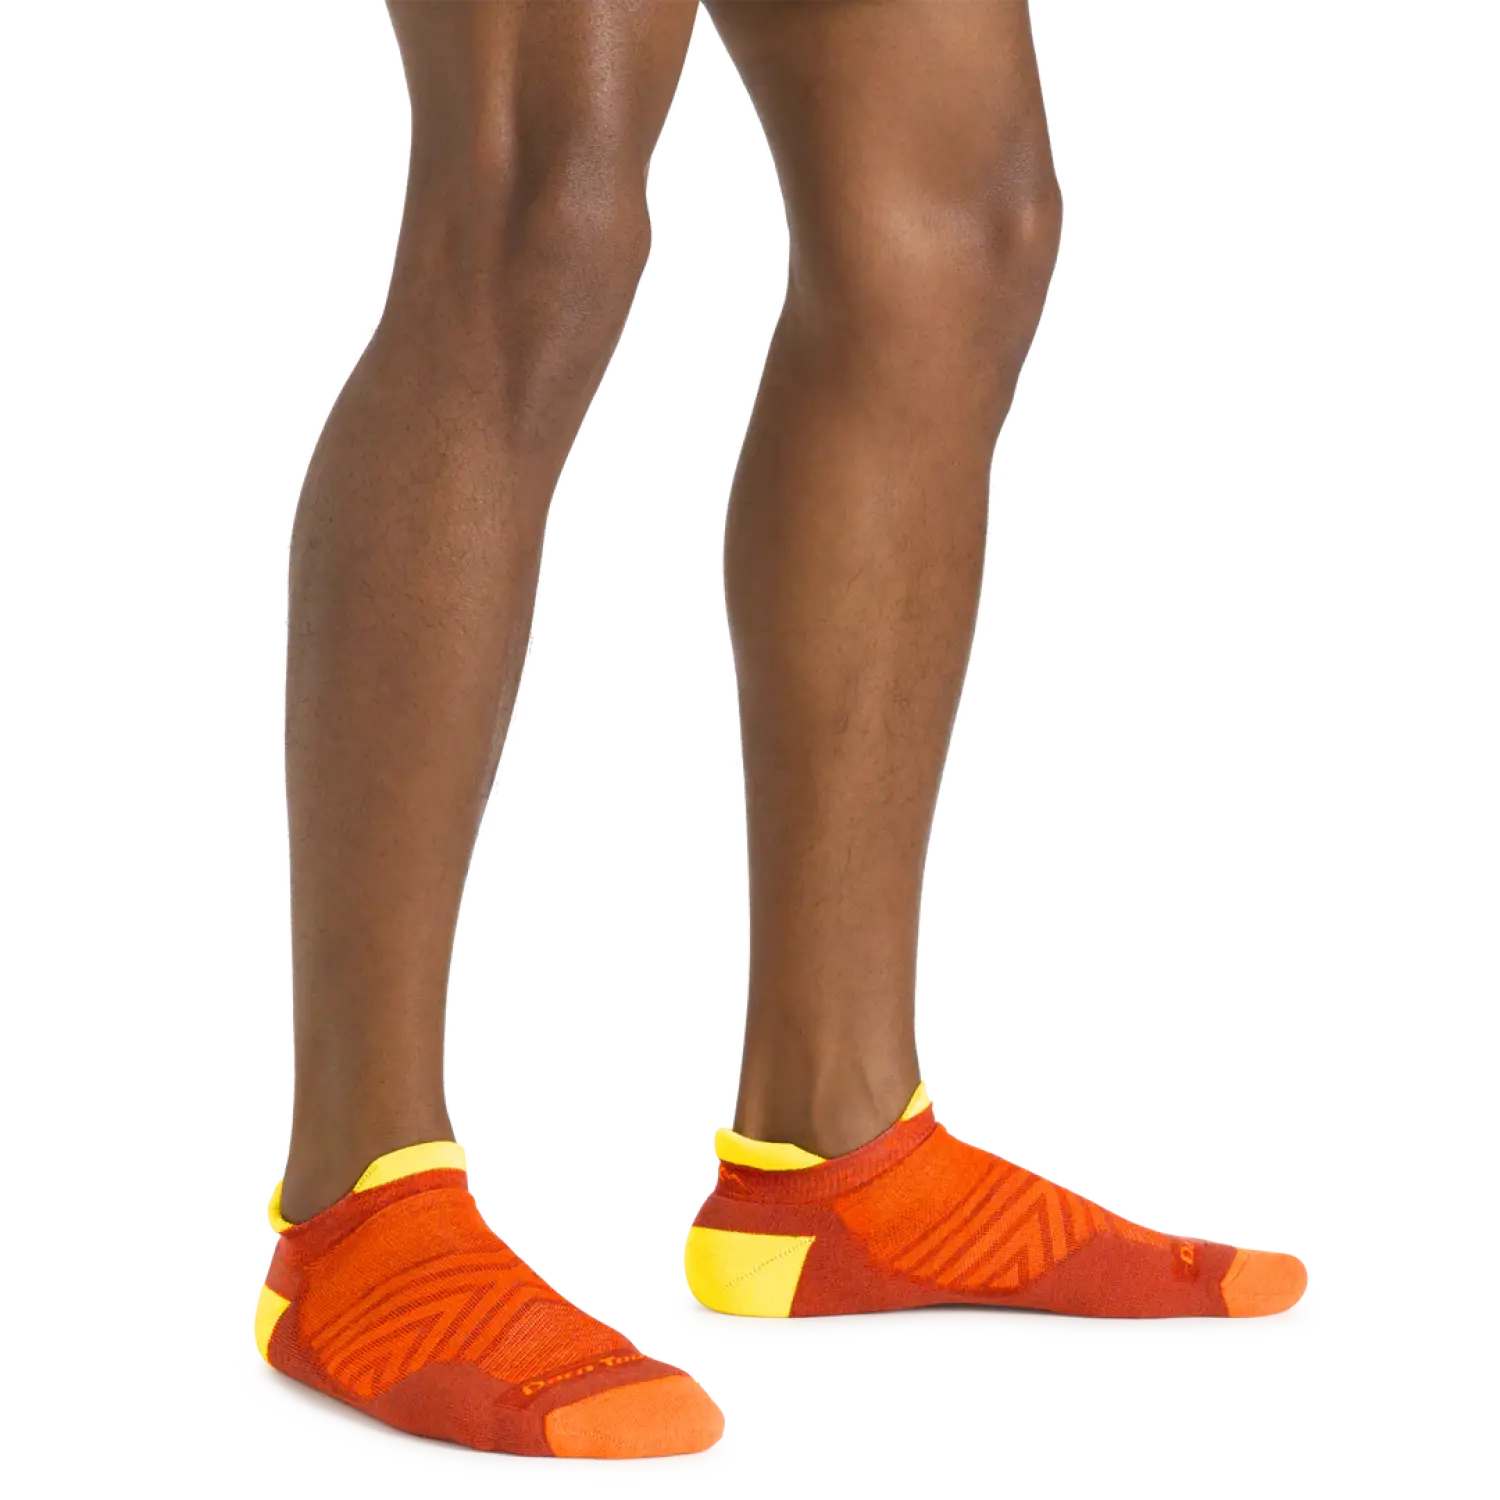 Darn Tough Men's Run No Show Tab Ultra-Lightweight Running Sock shown in the Lava color option. Shown on model.